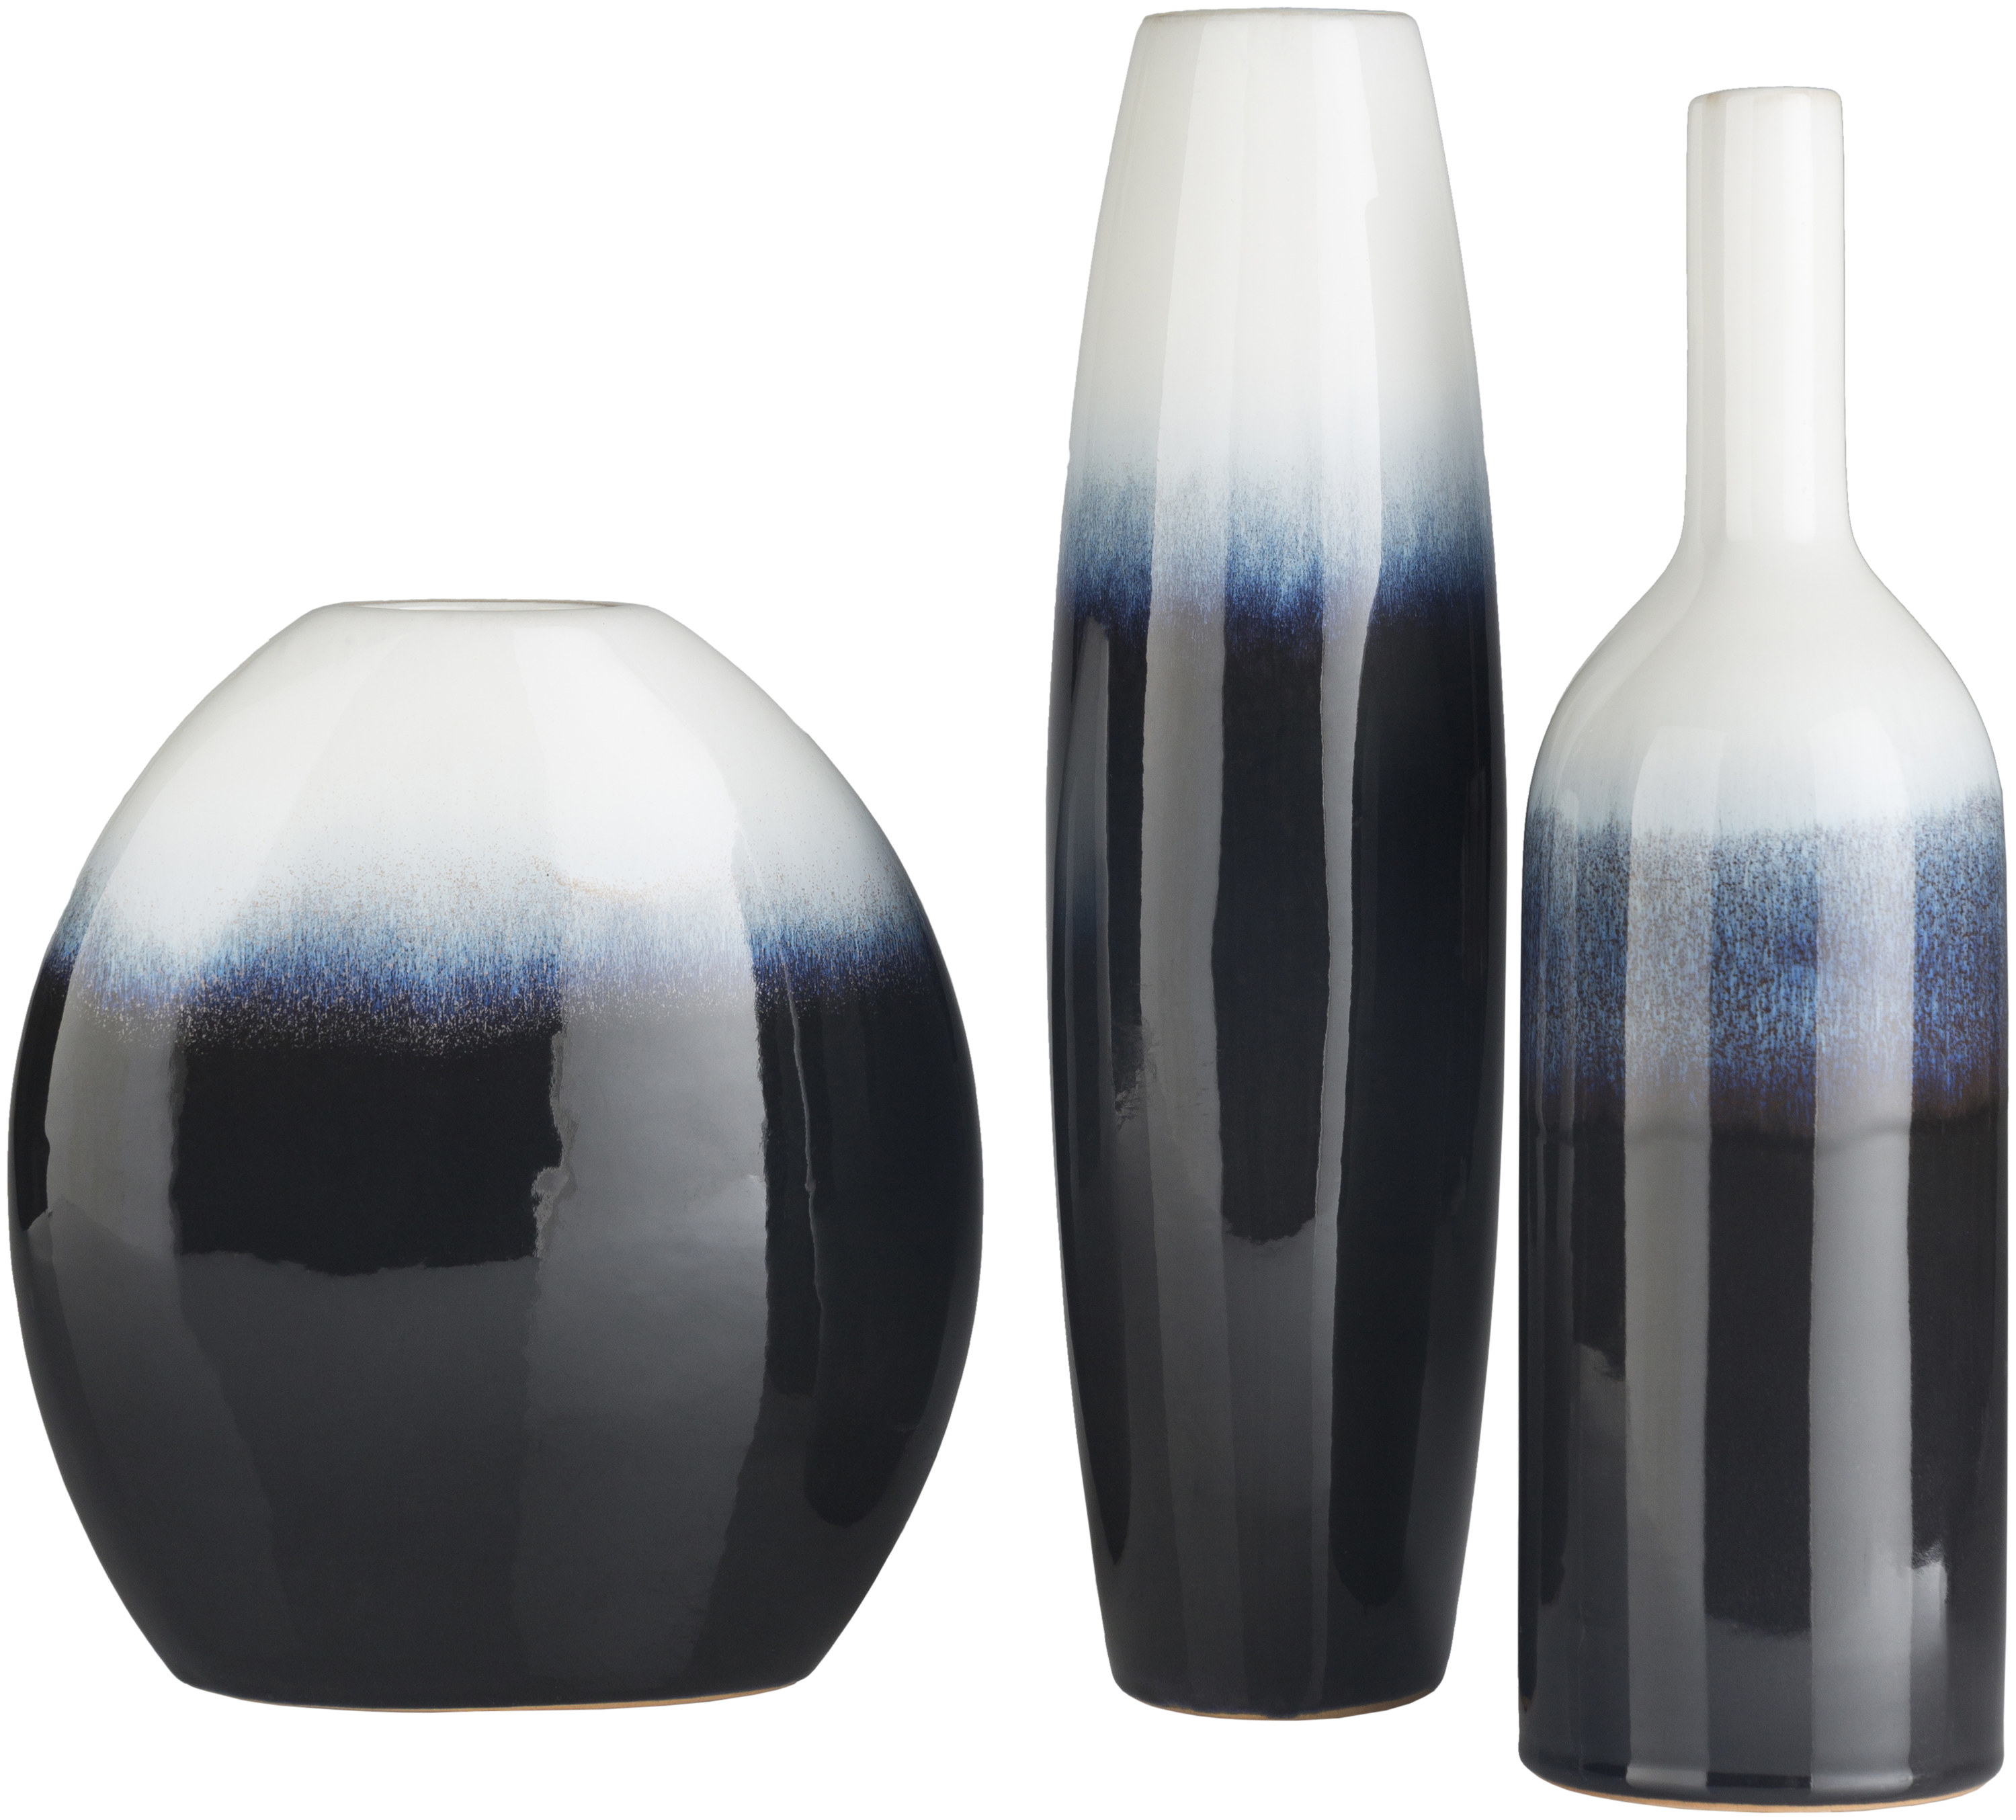 three different sized vases ombre&#x27;d from white to blue to black